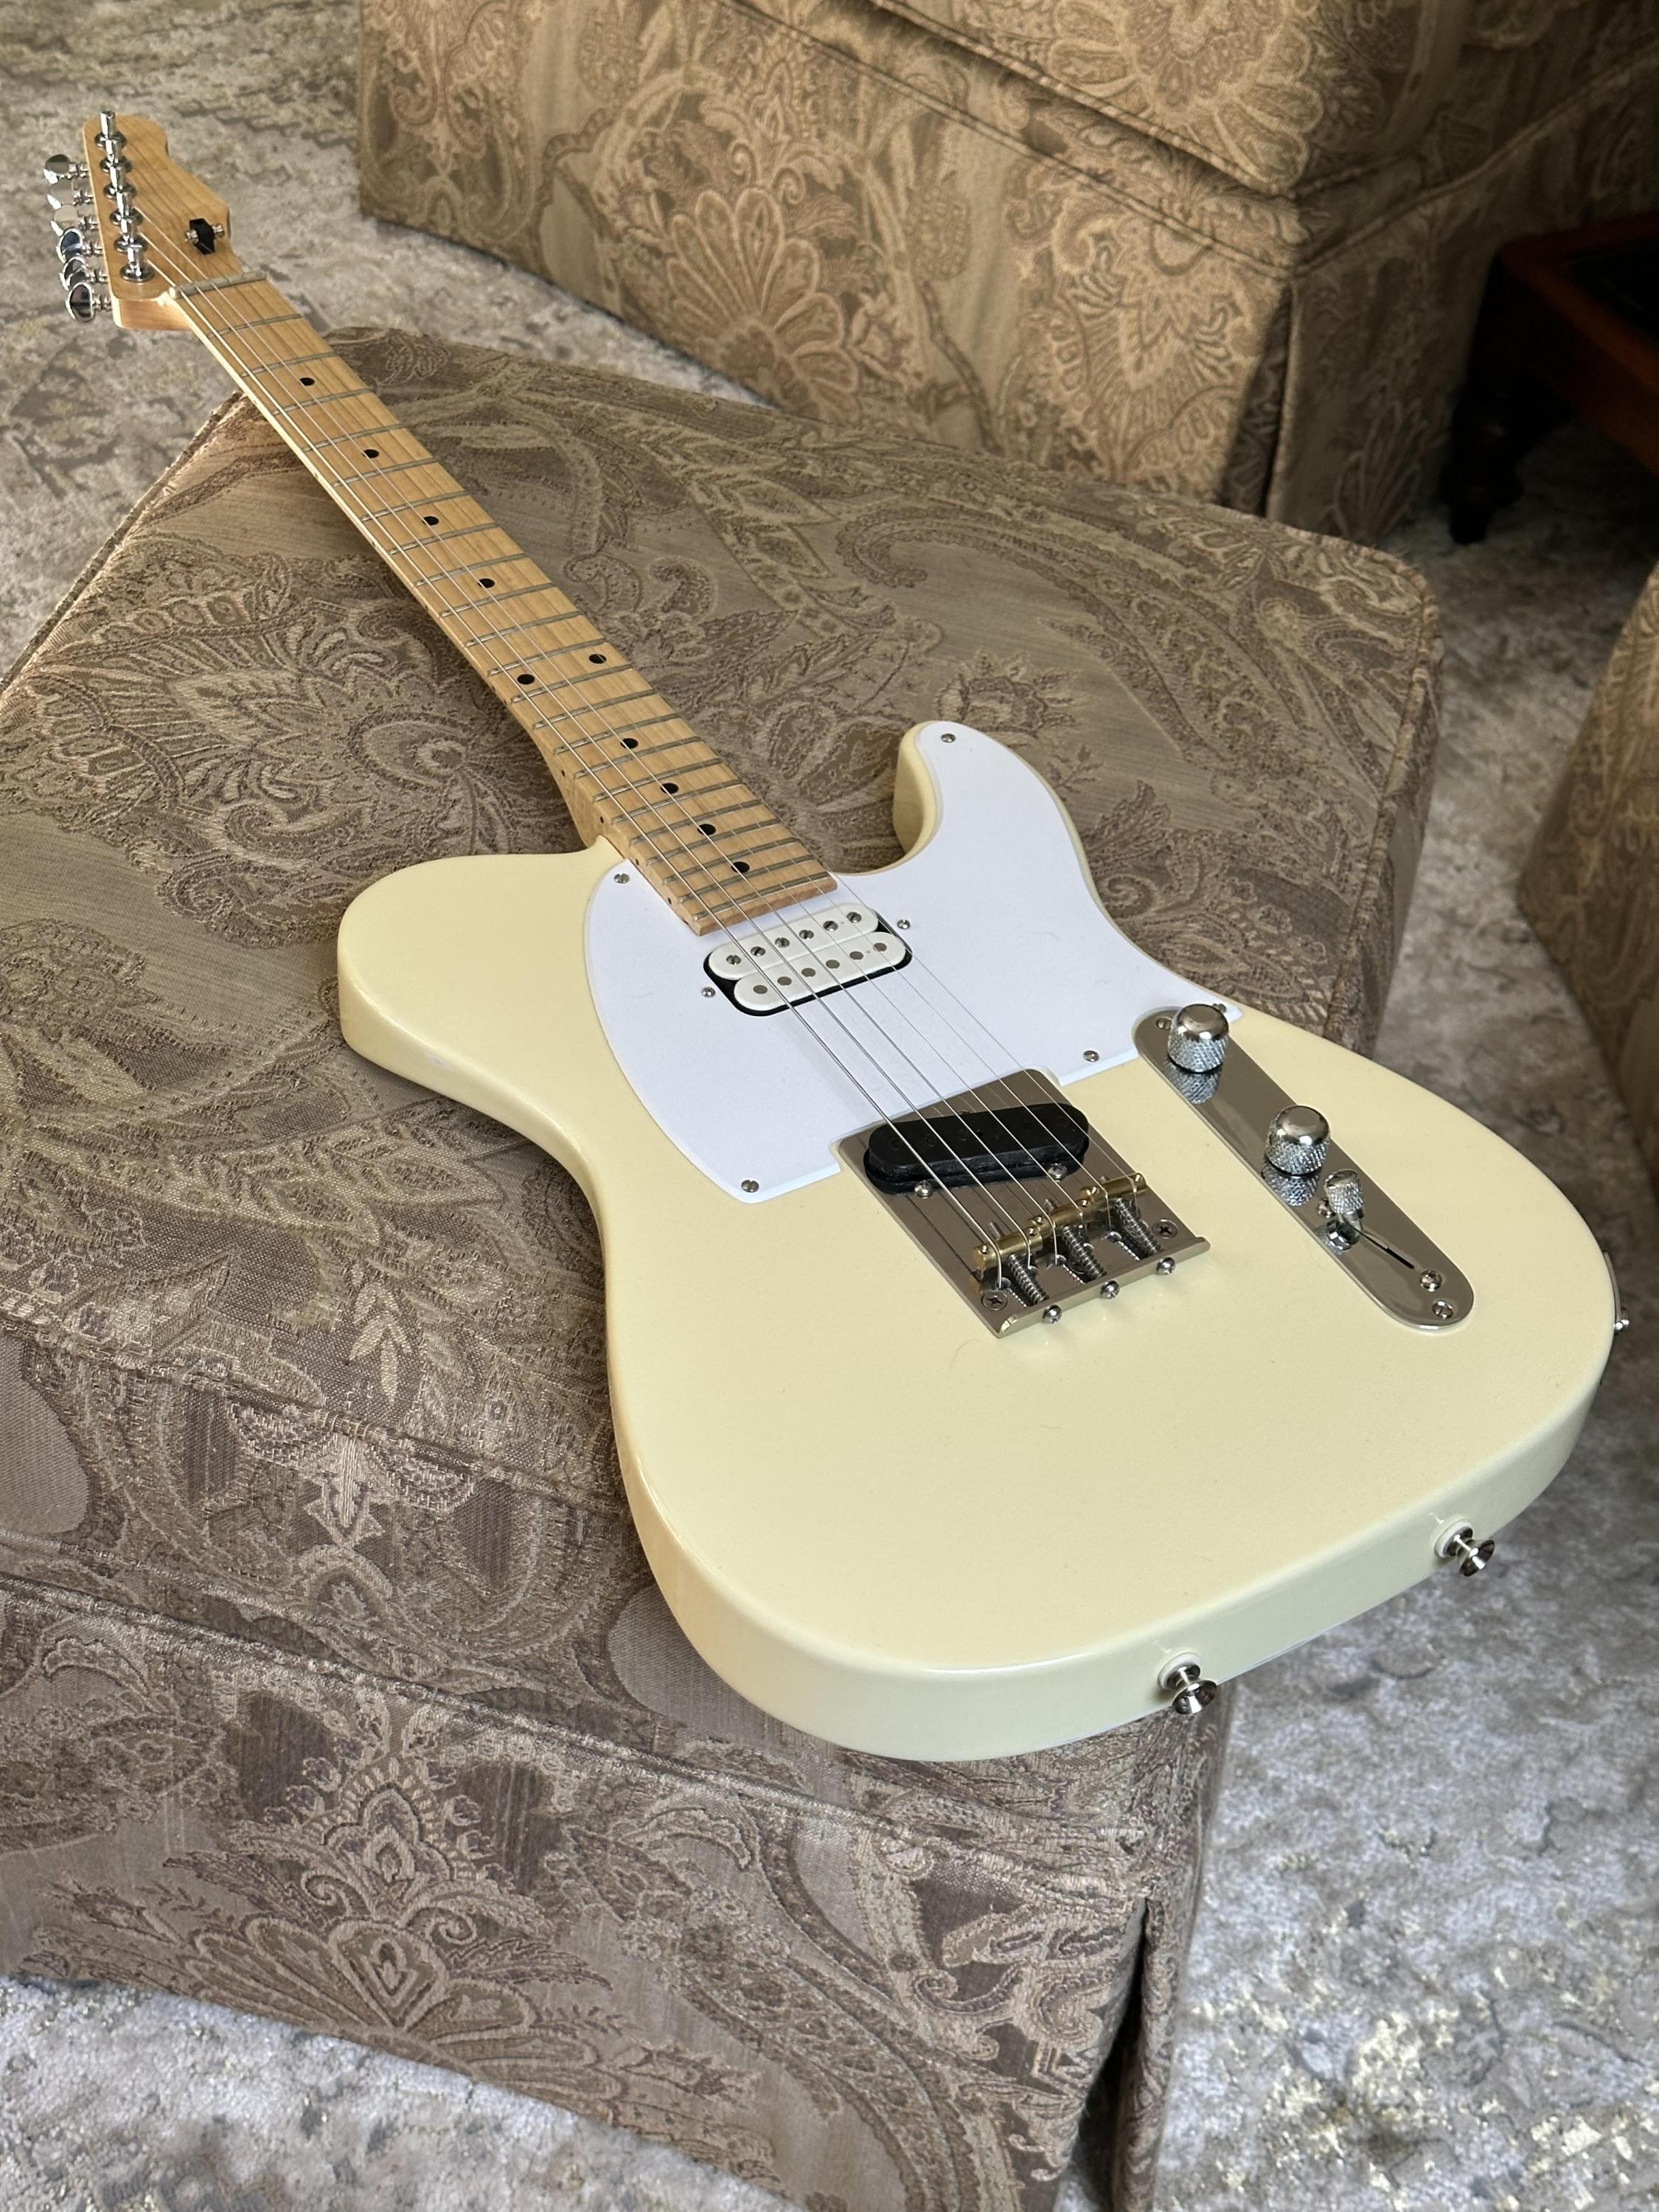 Telecaster Love Thread, No Archtops Allowed-telee-jpg